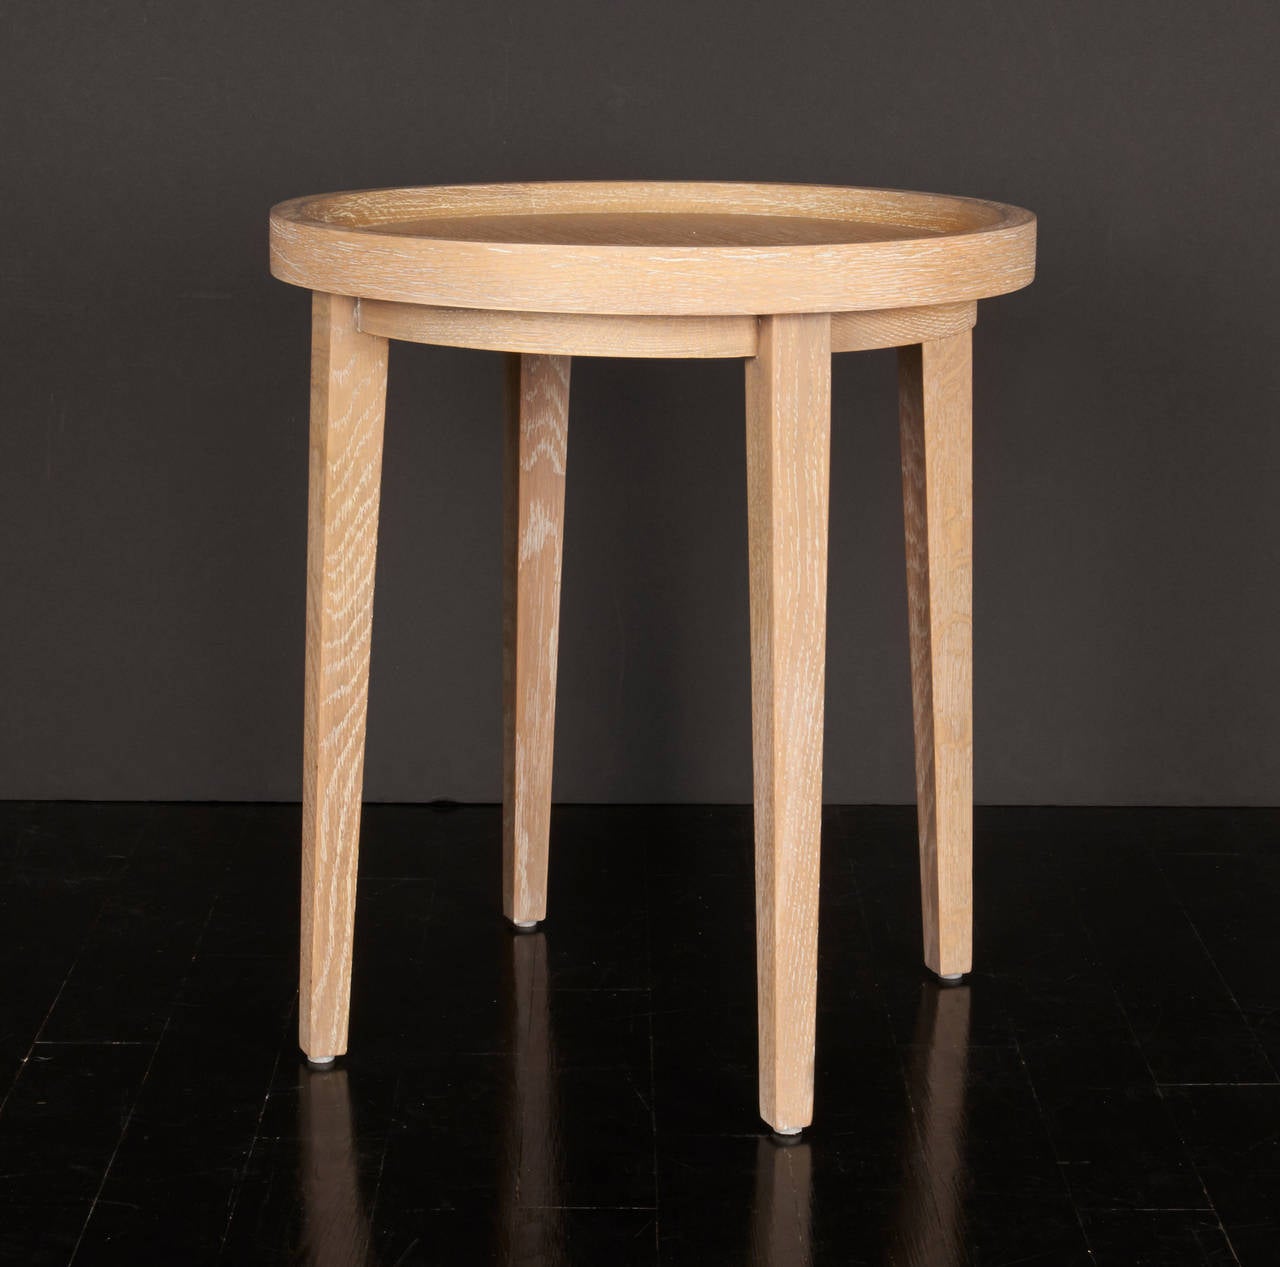 A small French oak side table with tapered legs and a round tray top.